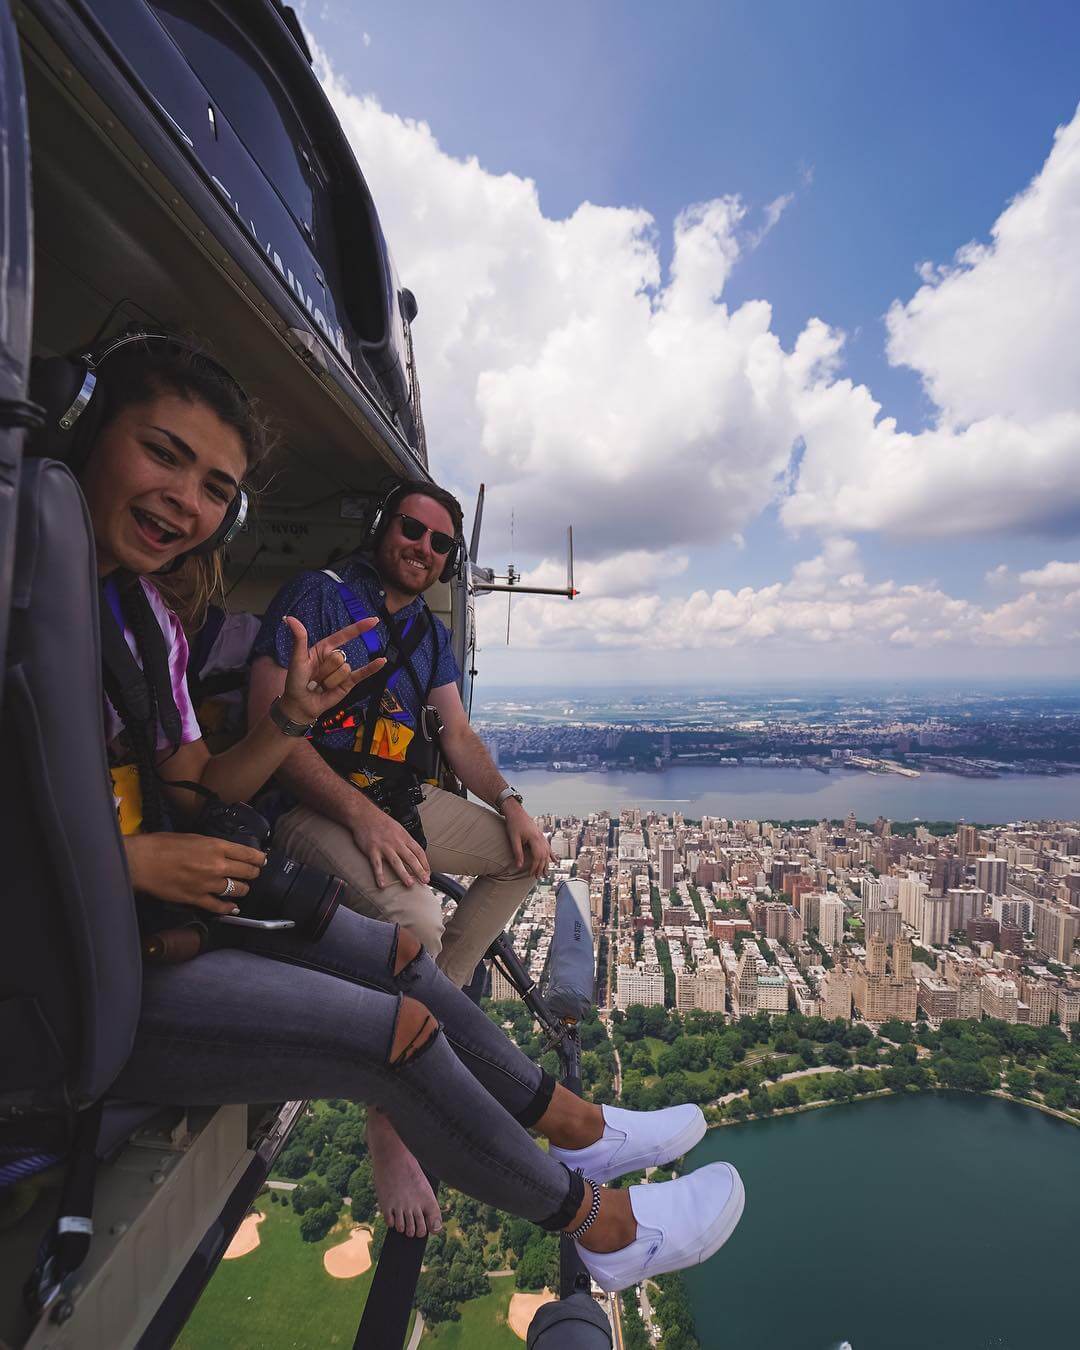 This photo posted to the FlyNYON Instagram account in July shows one passenger flying with bare feet, an option for customers who show up with loose-fitting shoes.